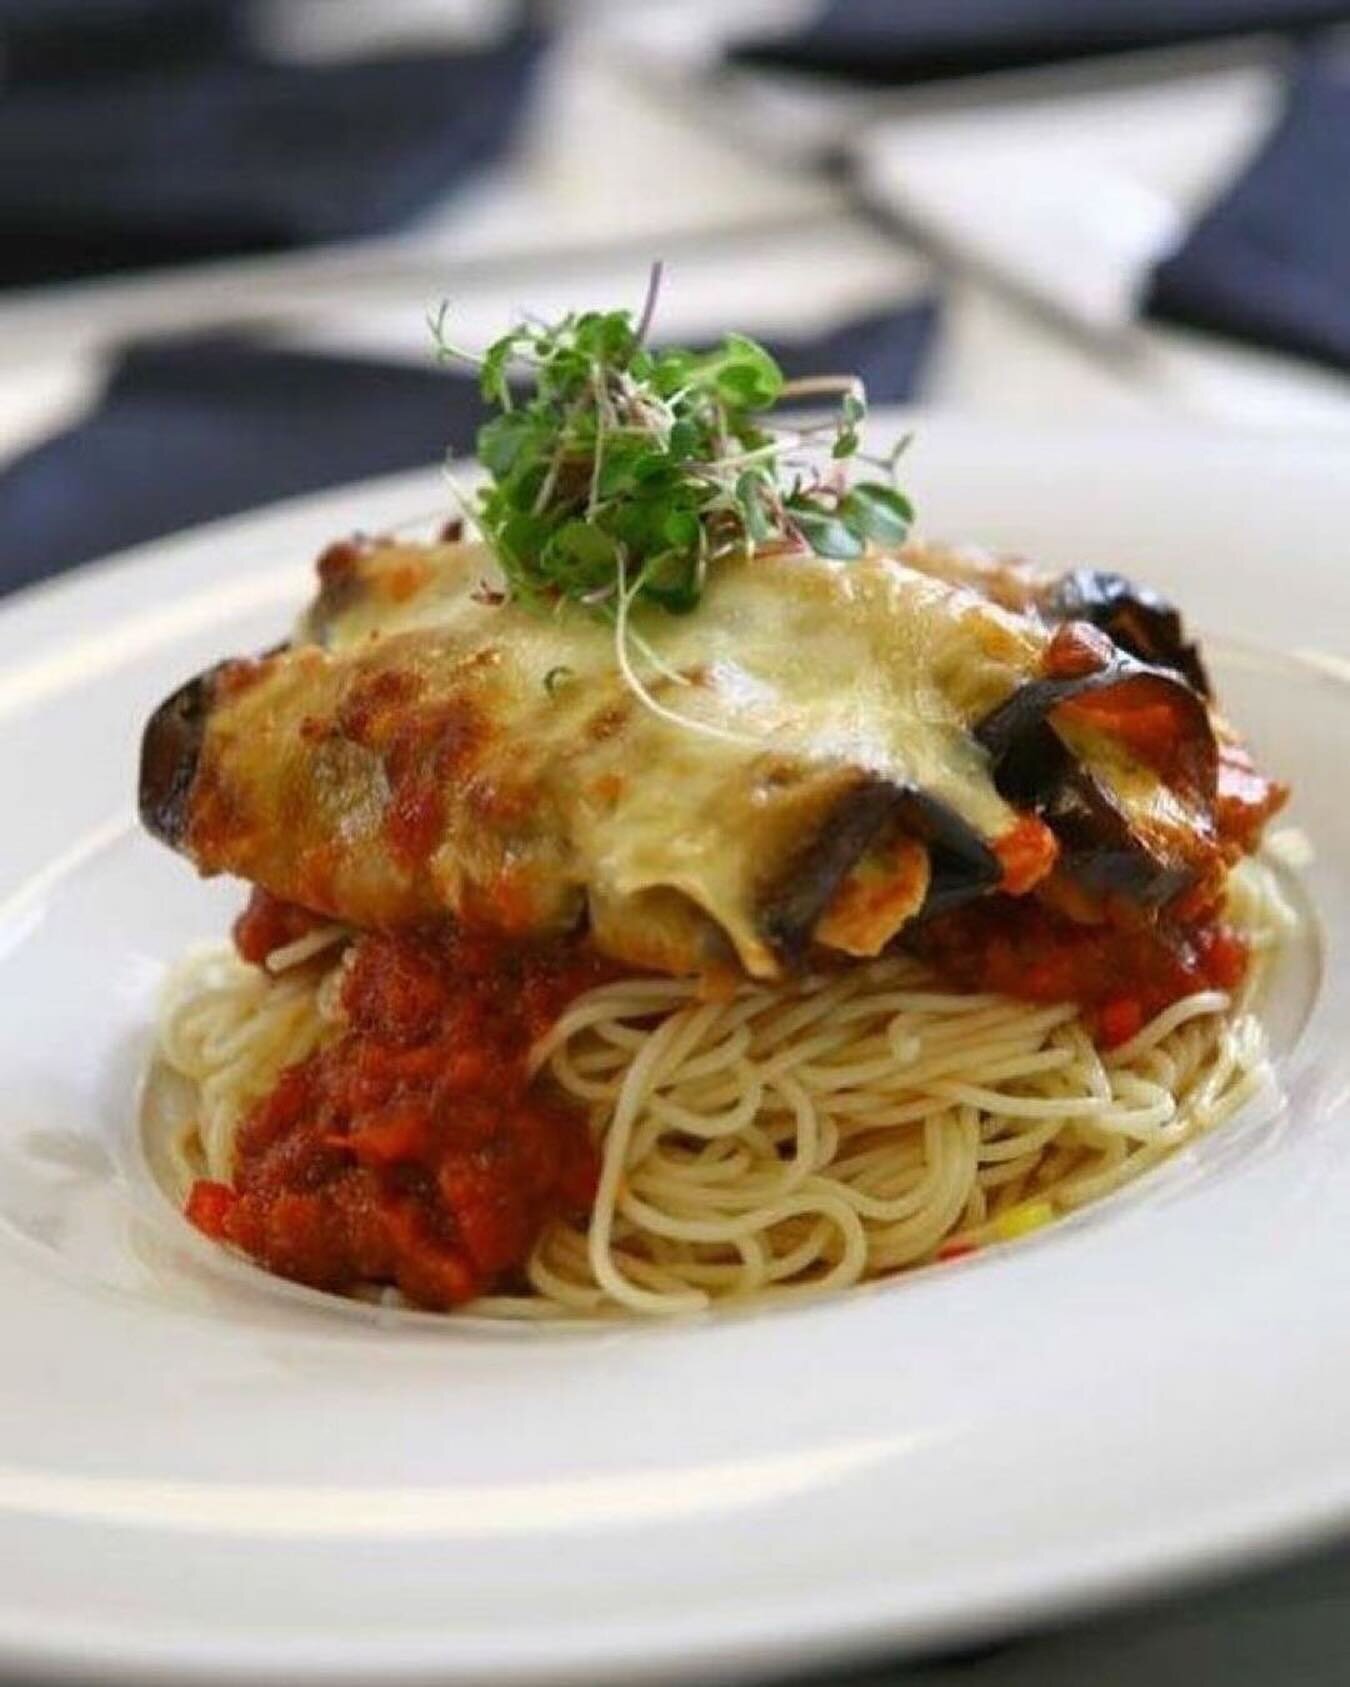 Our #meatlessmonday favorite is this delicious Eggplant Parmesan Cannelloni. Stuffed with Ricotta, topped with our wickedly delicious Marinara and served over Angel Hair Pasta, this meal is an absolute delight. If you&rsquo;re looking for the perfect